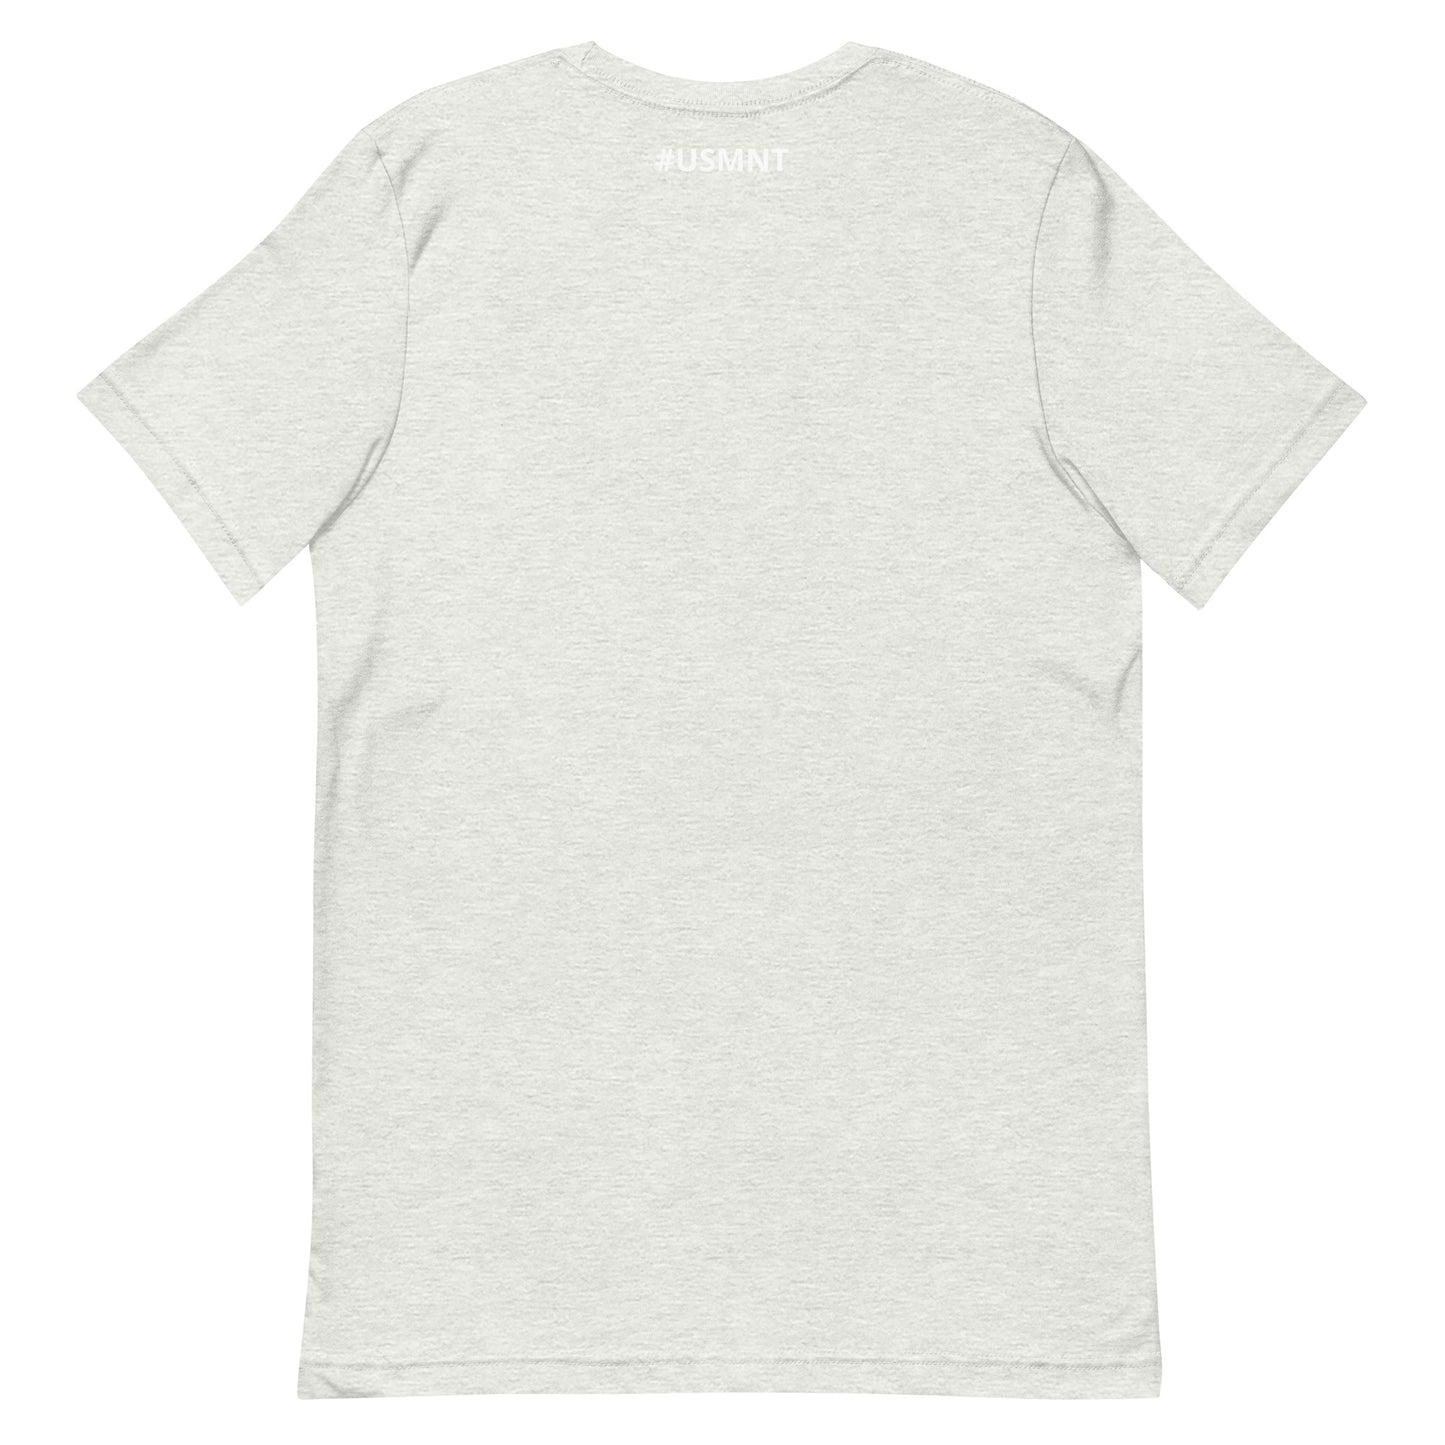 These are the Guys - Starry White - Official T-Shirt